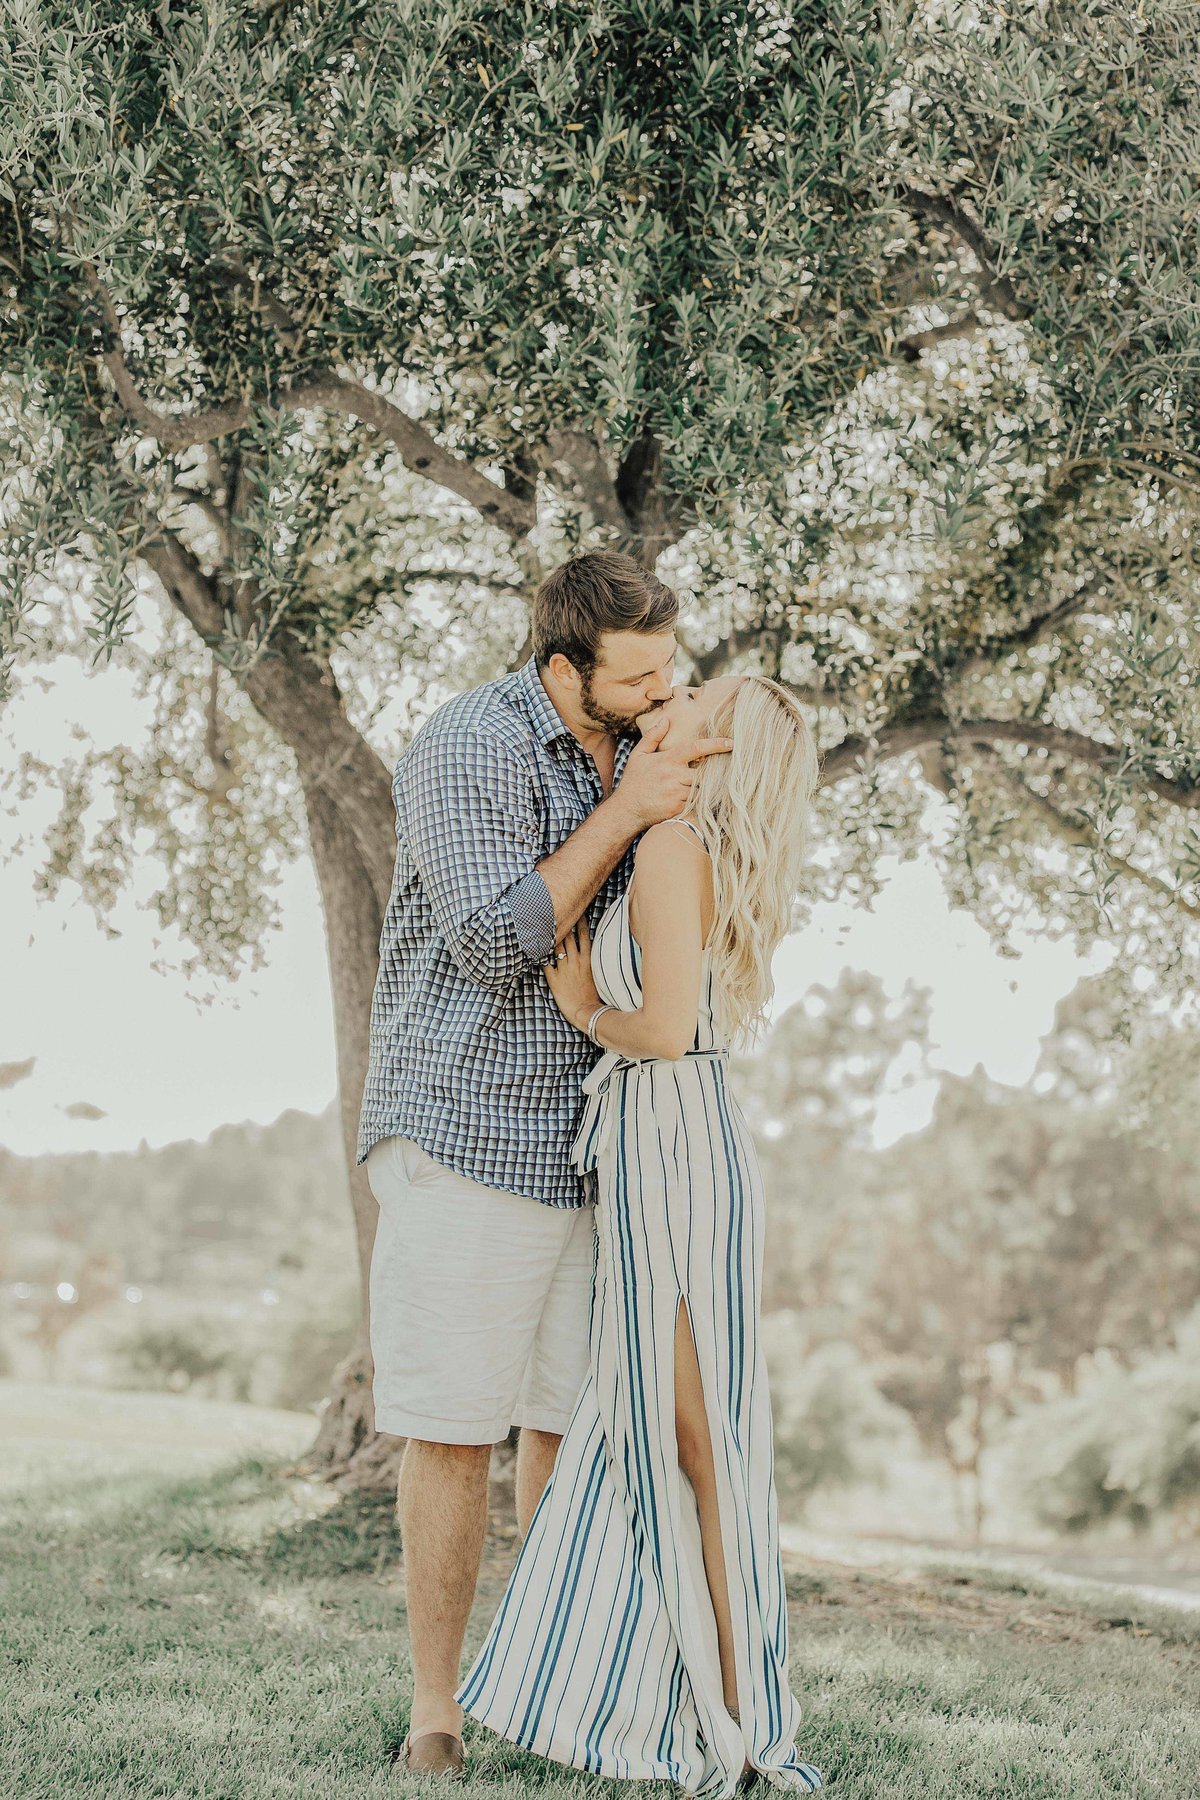 Babsie-Ly-Photography-Fine-Art-Film-Surprise-Proposal-Photographer-Temecula-Thornton-Winery-California-008